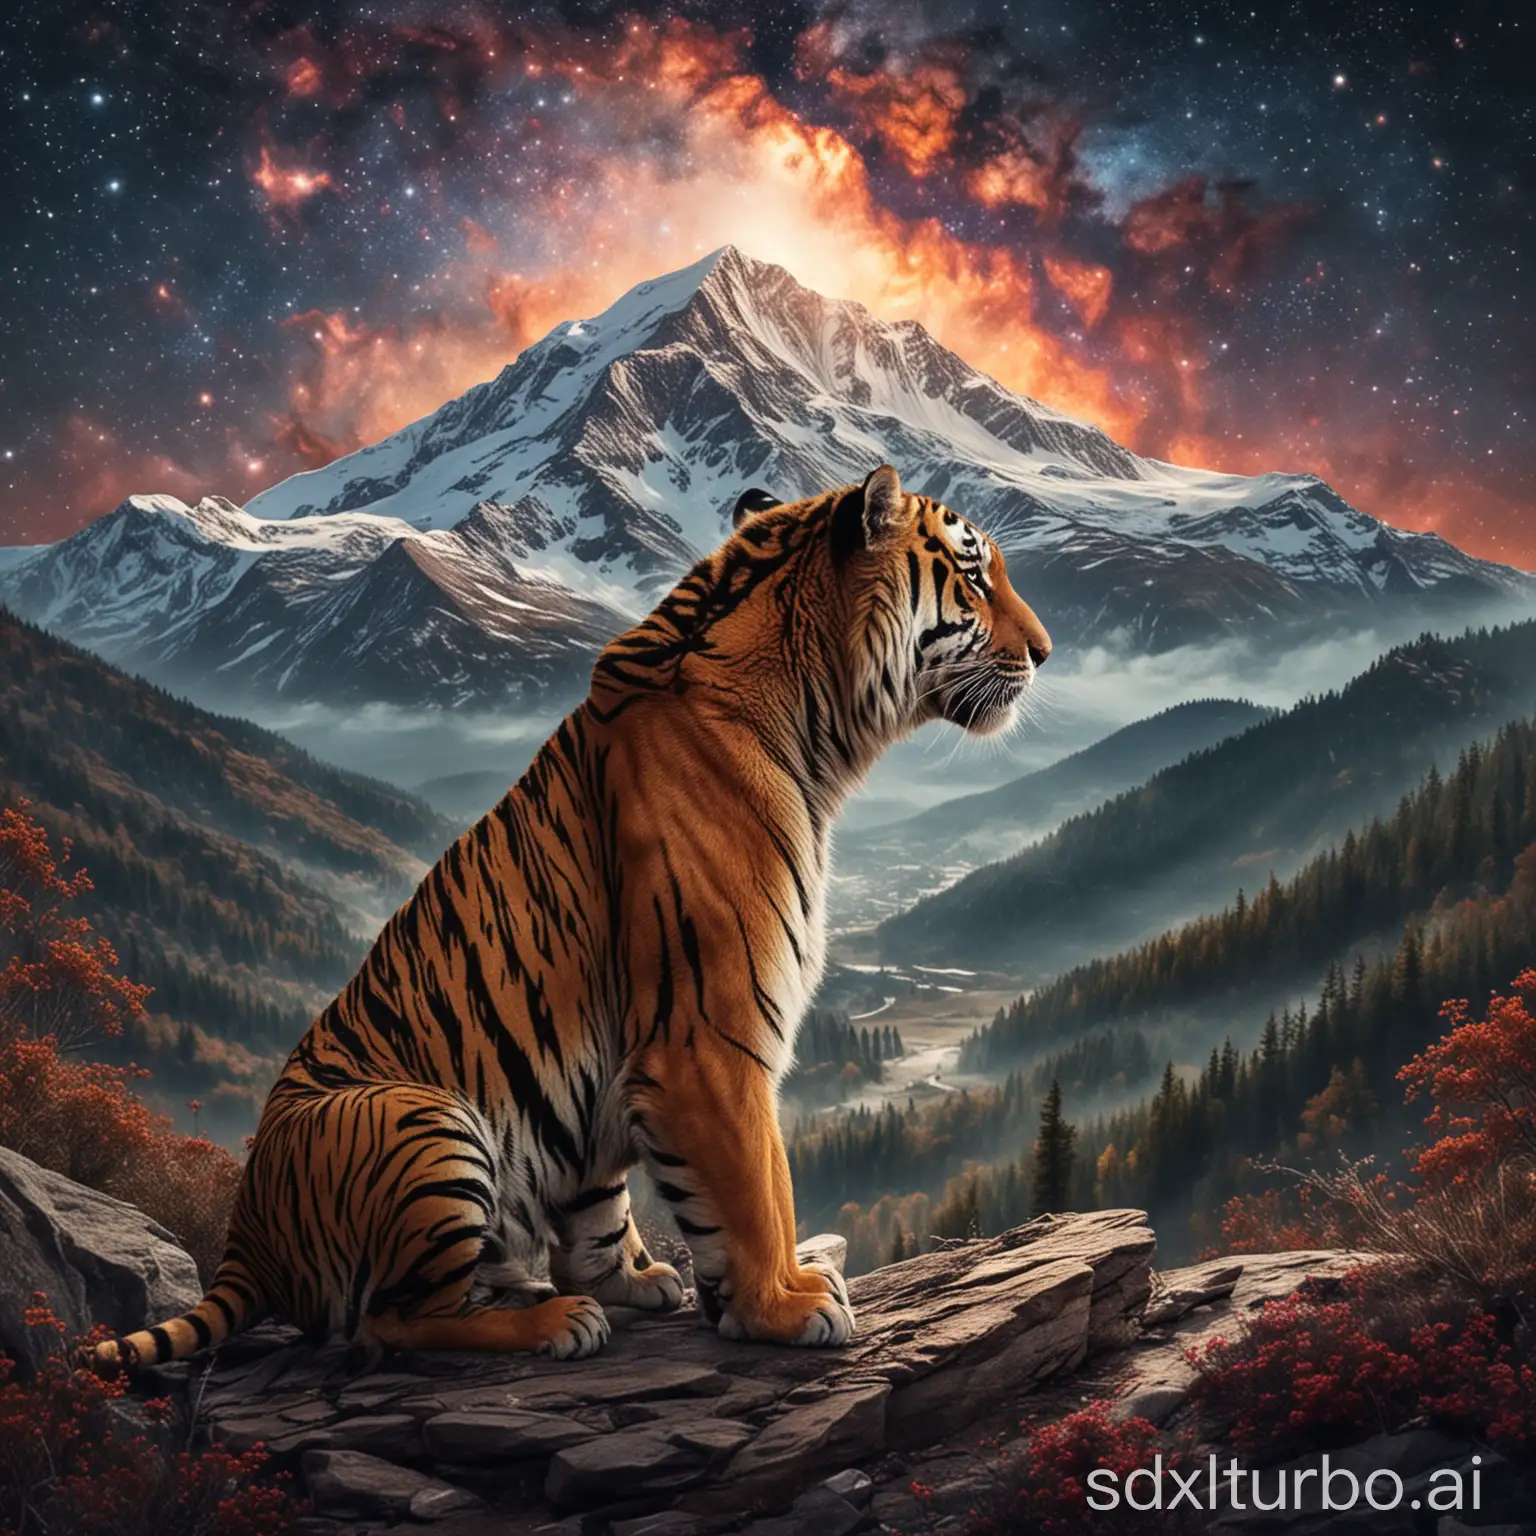 Majestic-Tiger-Amidst-Hope-and-Love-in-the-Cosmic-Mountain-Landscape